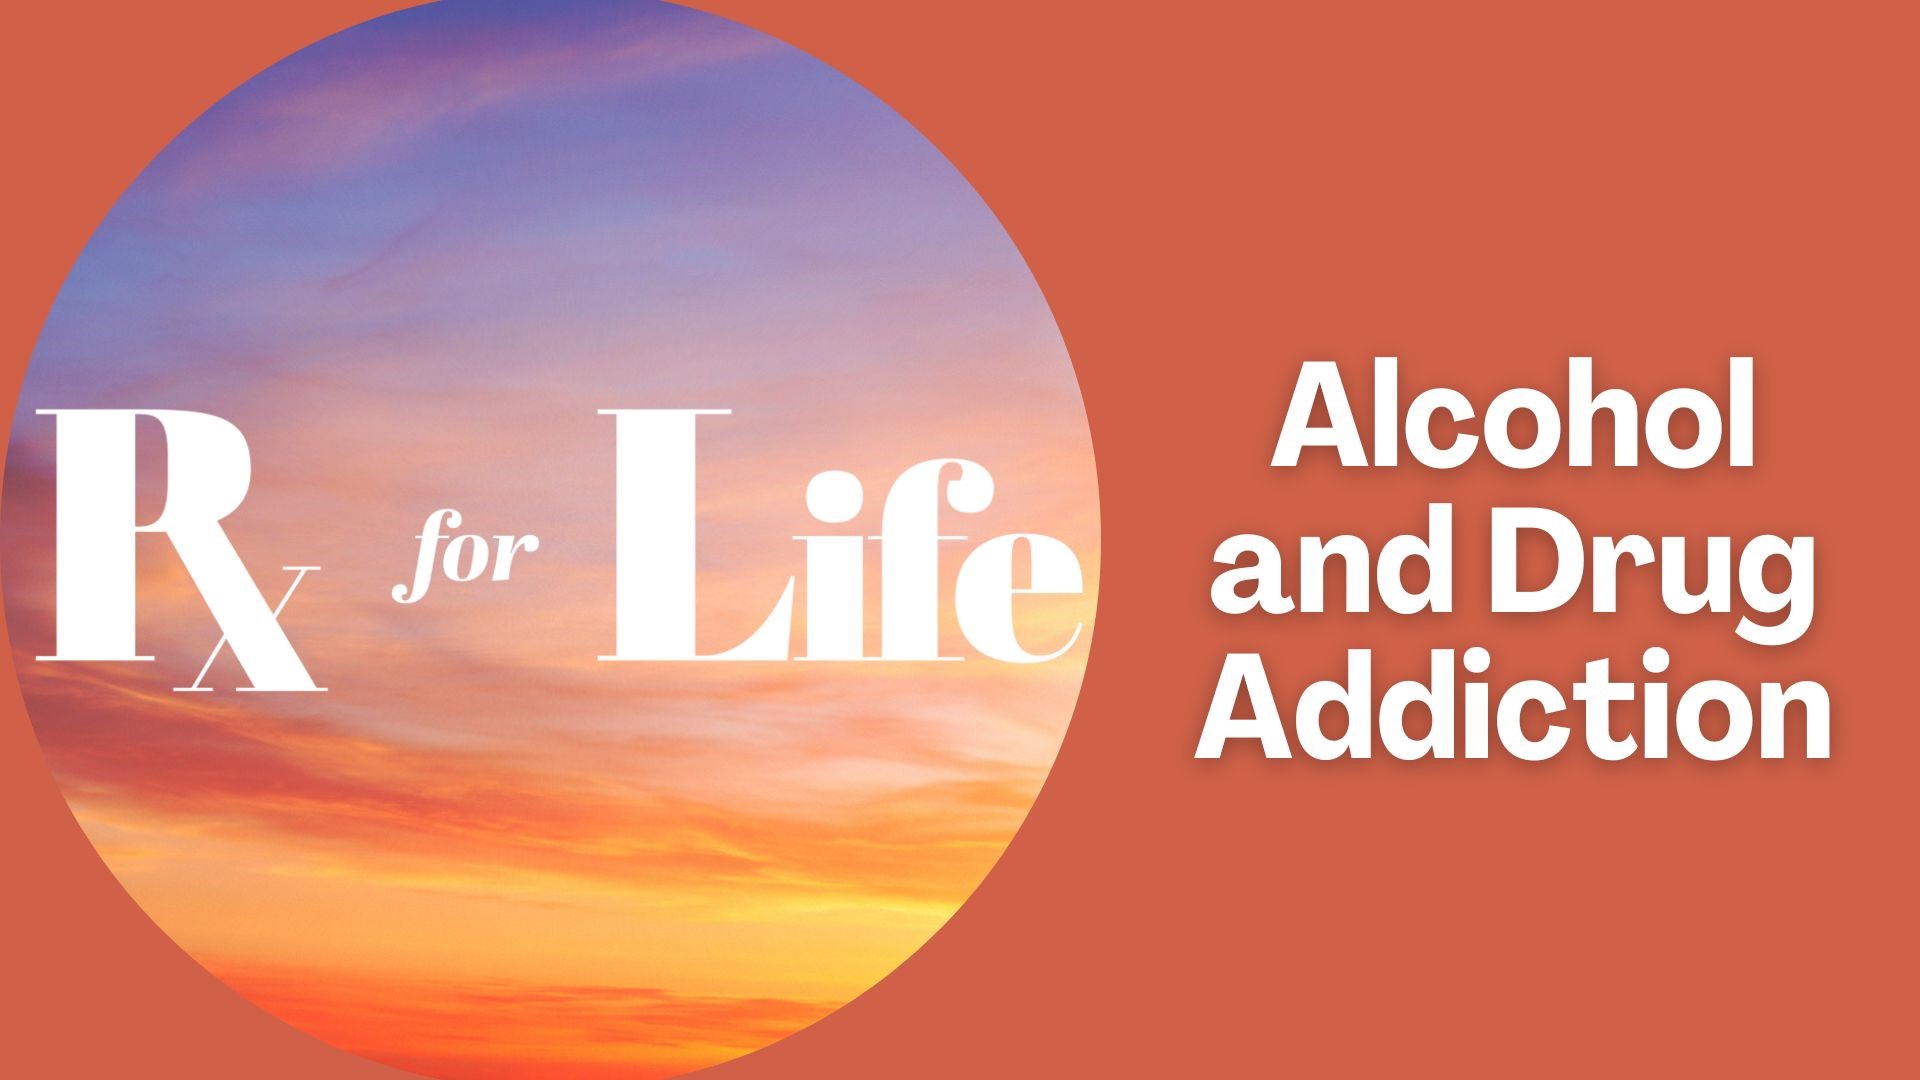 Monica Robins sits down with an expert to discuss alcohol and drug addiction. The signs to look out for and when to ask for help.